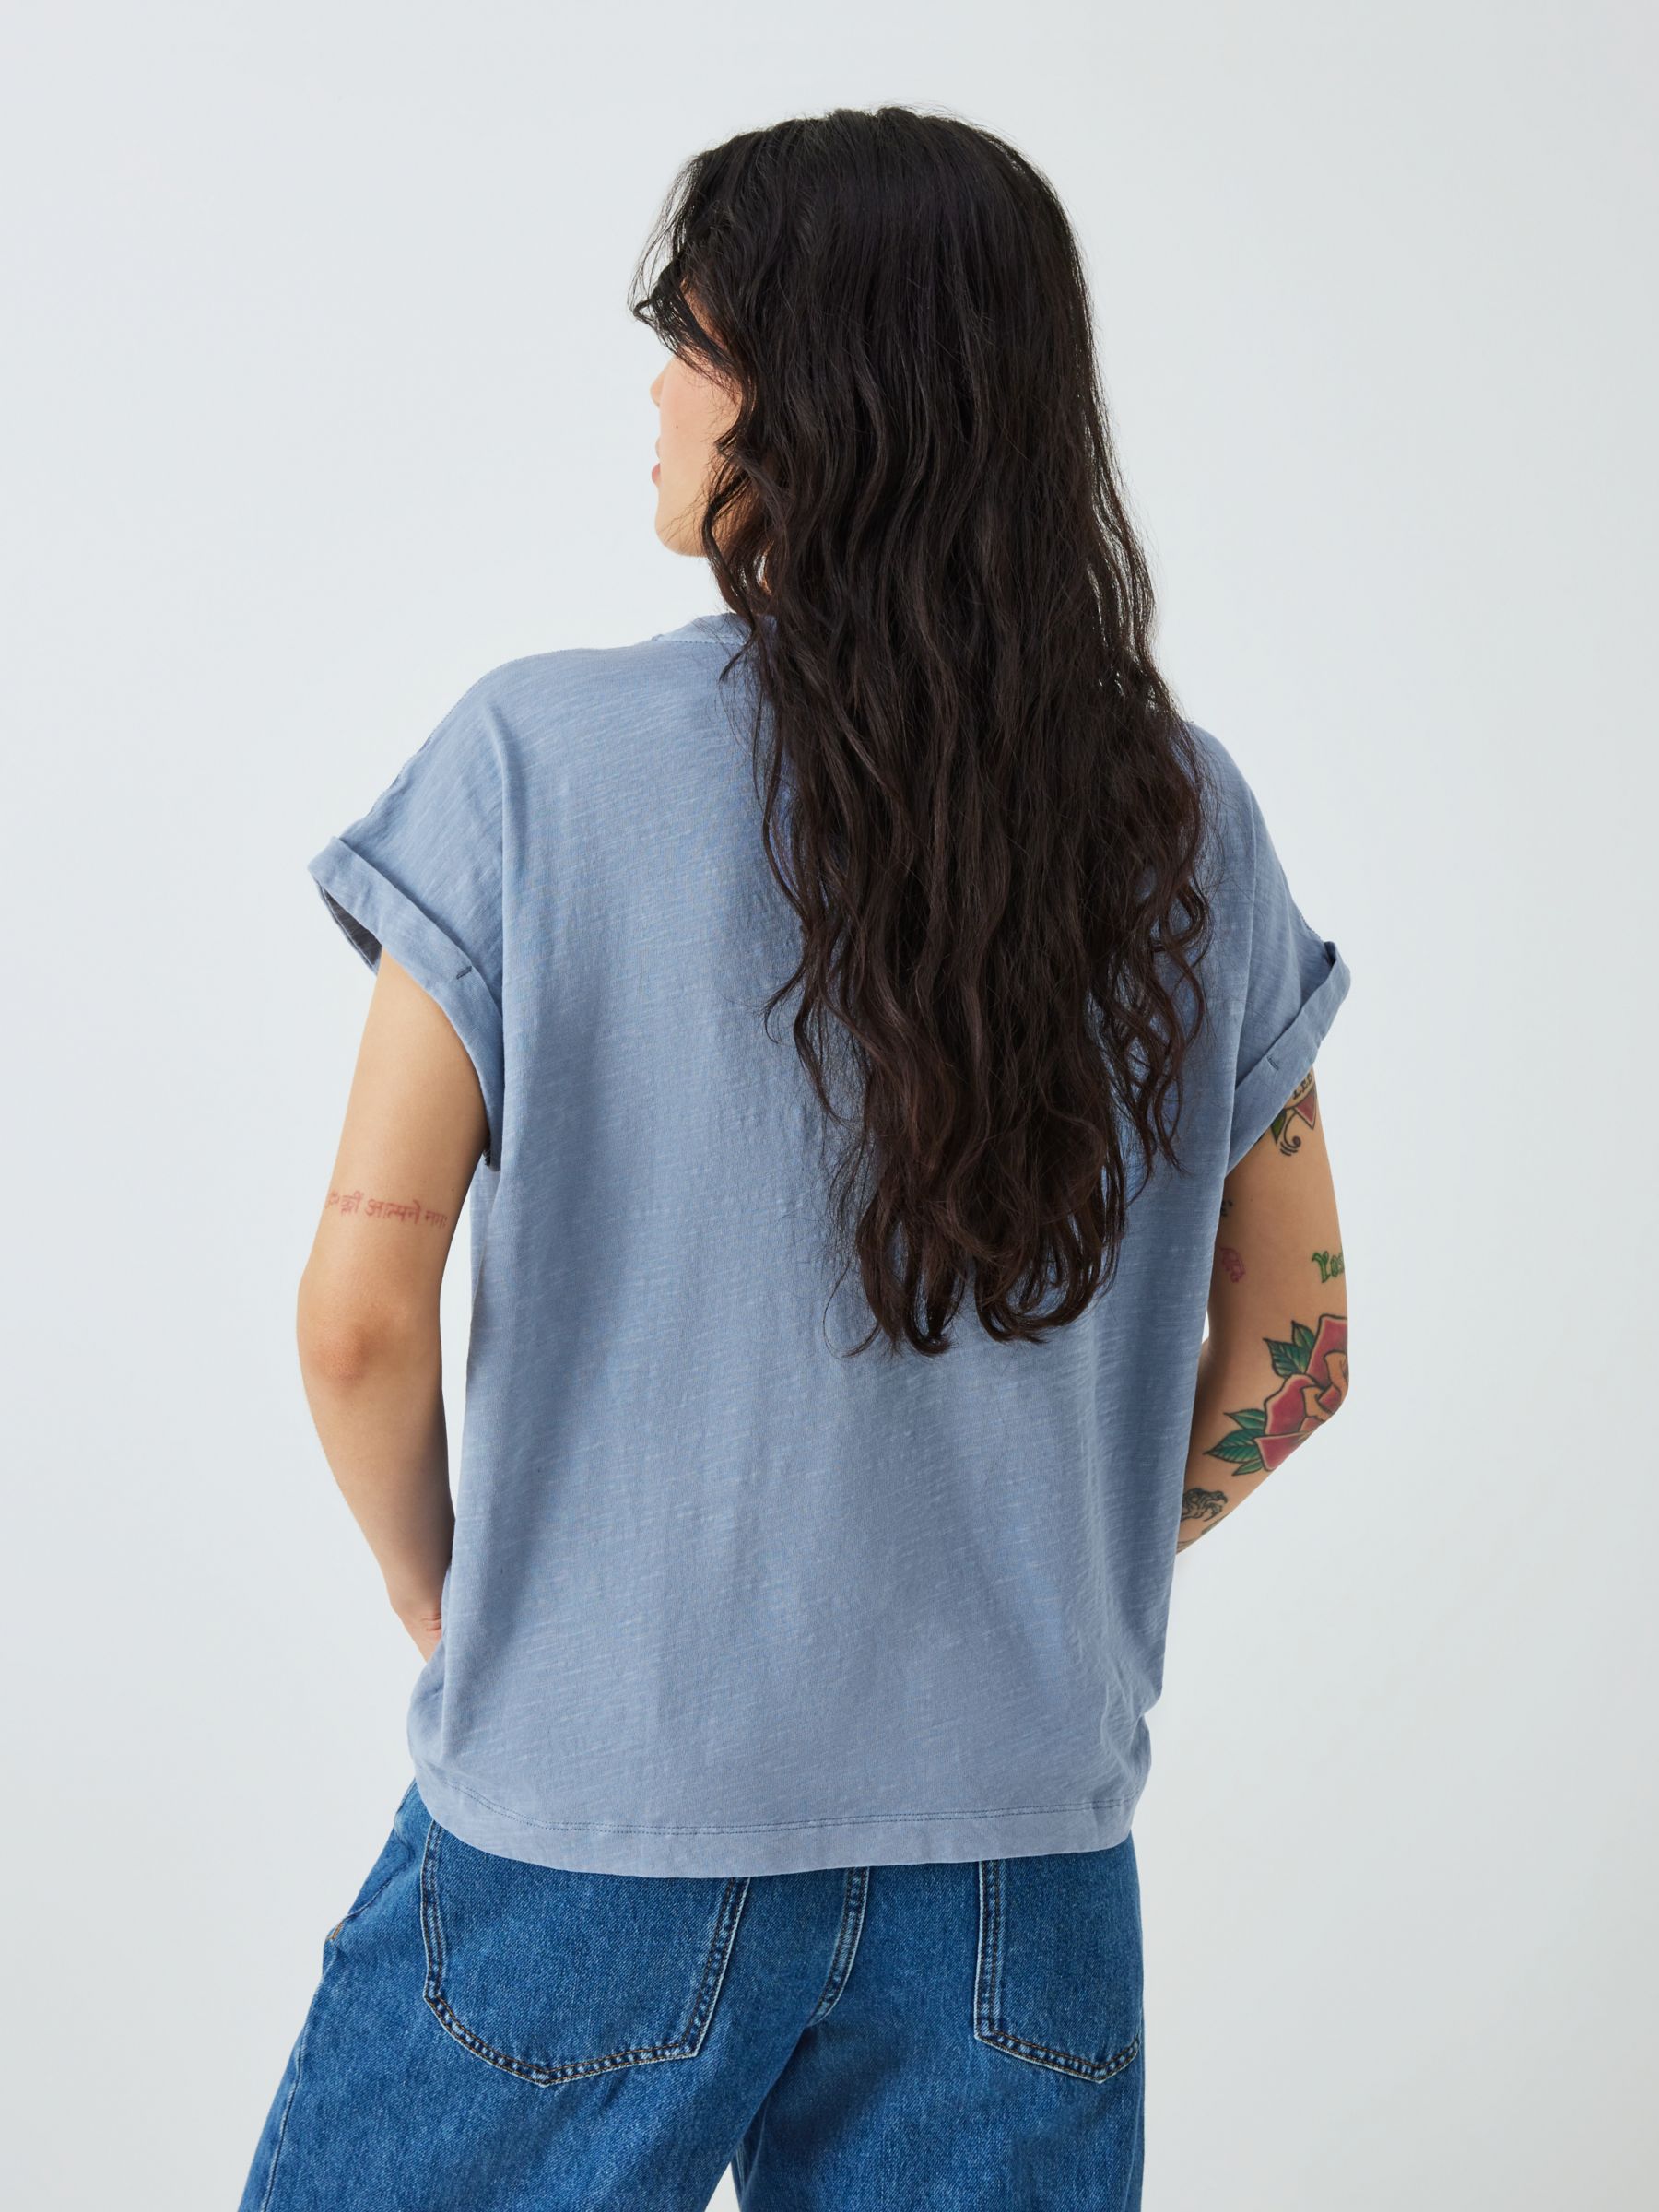 AND/OR Garment Dyed Stitch Tank T-Shirt, Soft Blue, 12